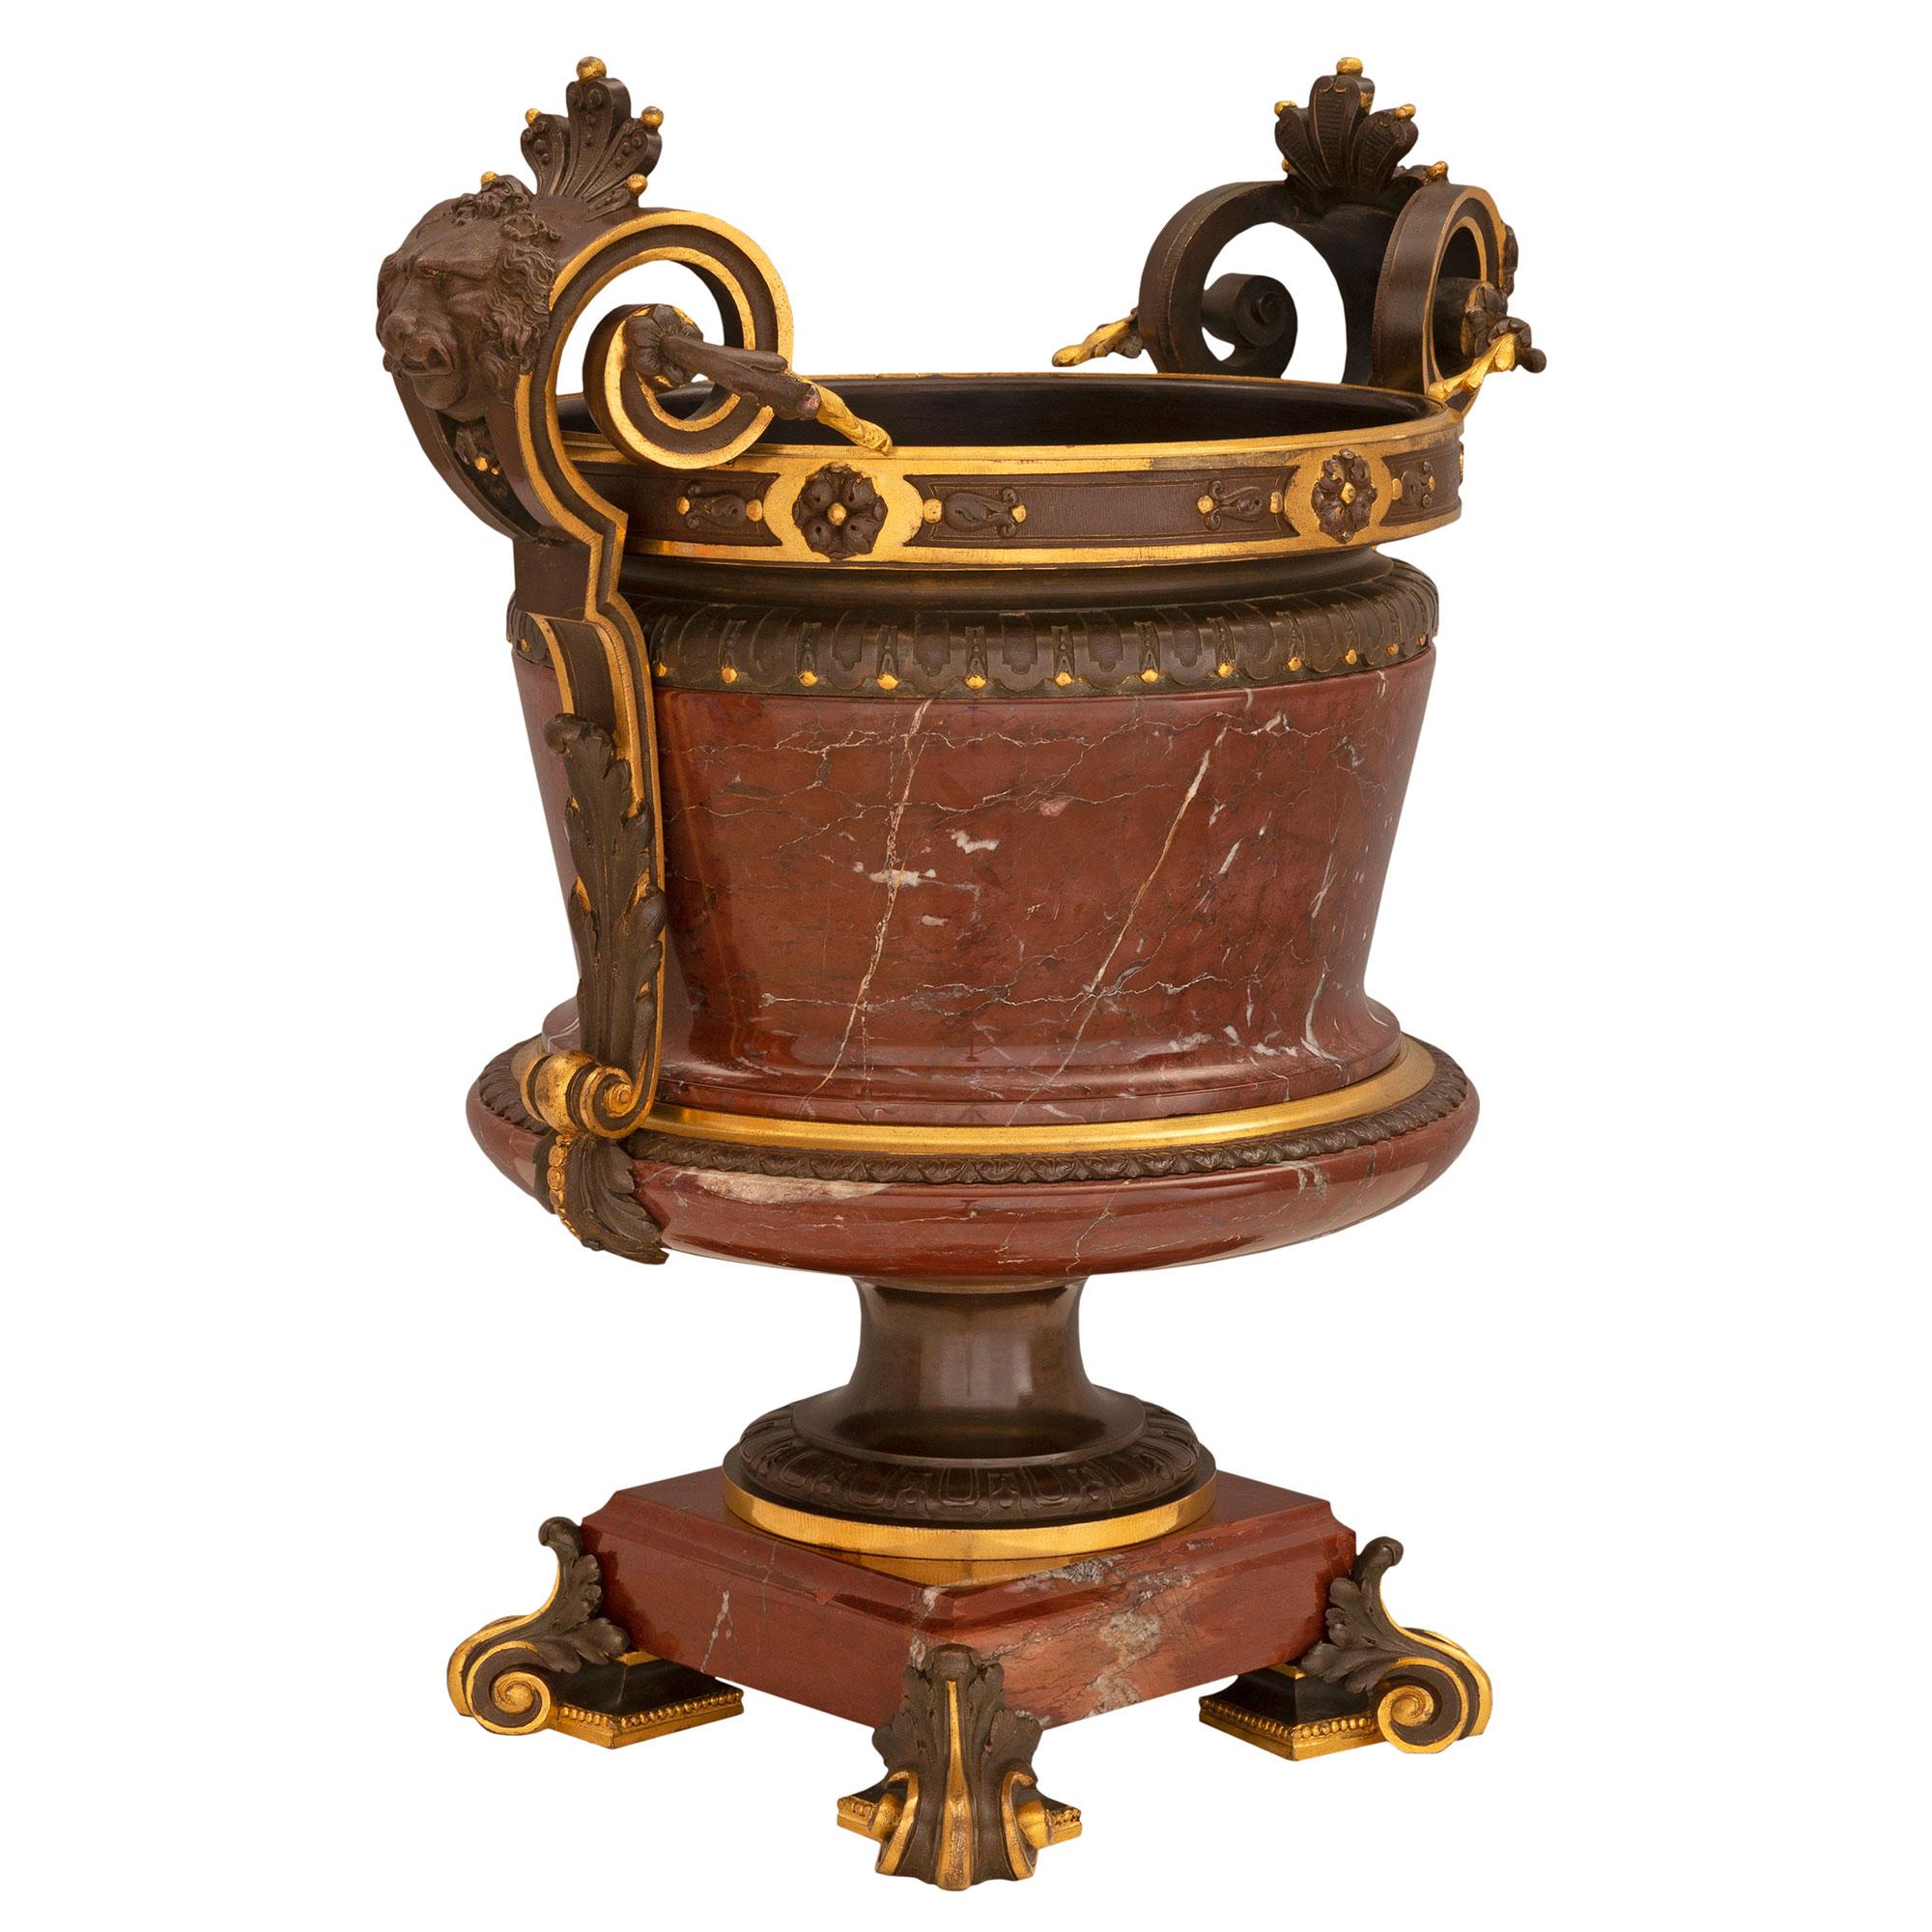 Patinated French 19th Century Neo-Classical St. Bronze, Ormolu and Marble Urn